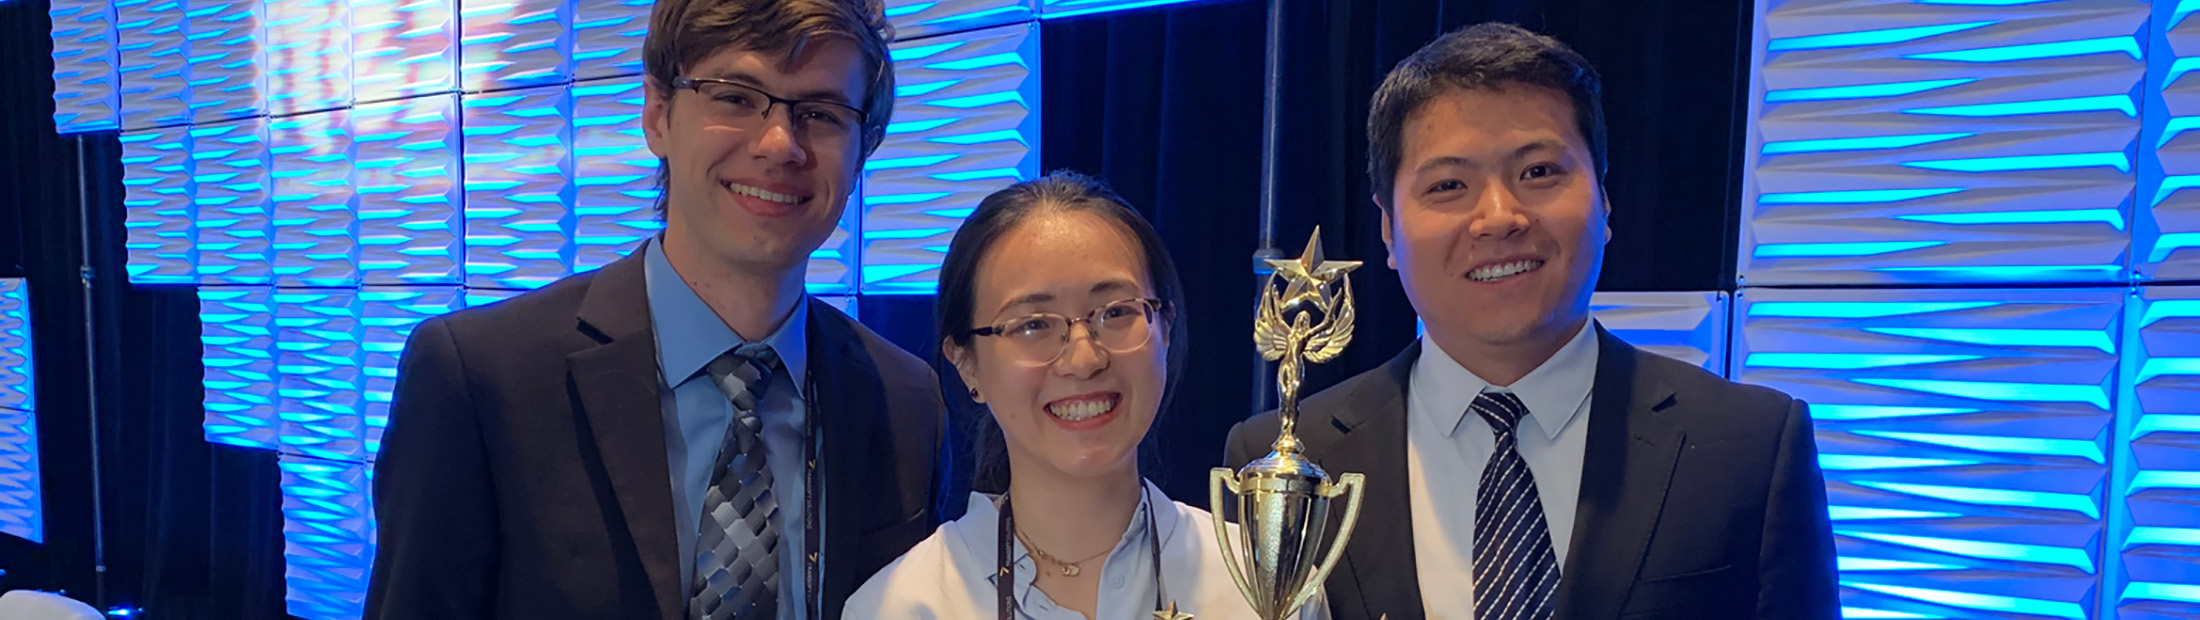 Group image of U-M team members Alex Sundt, Xiatong Sun and Yan Zhao with their trophy